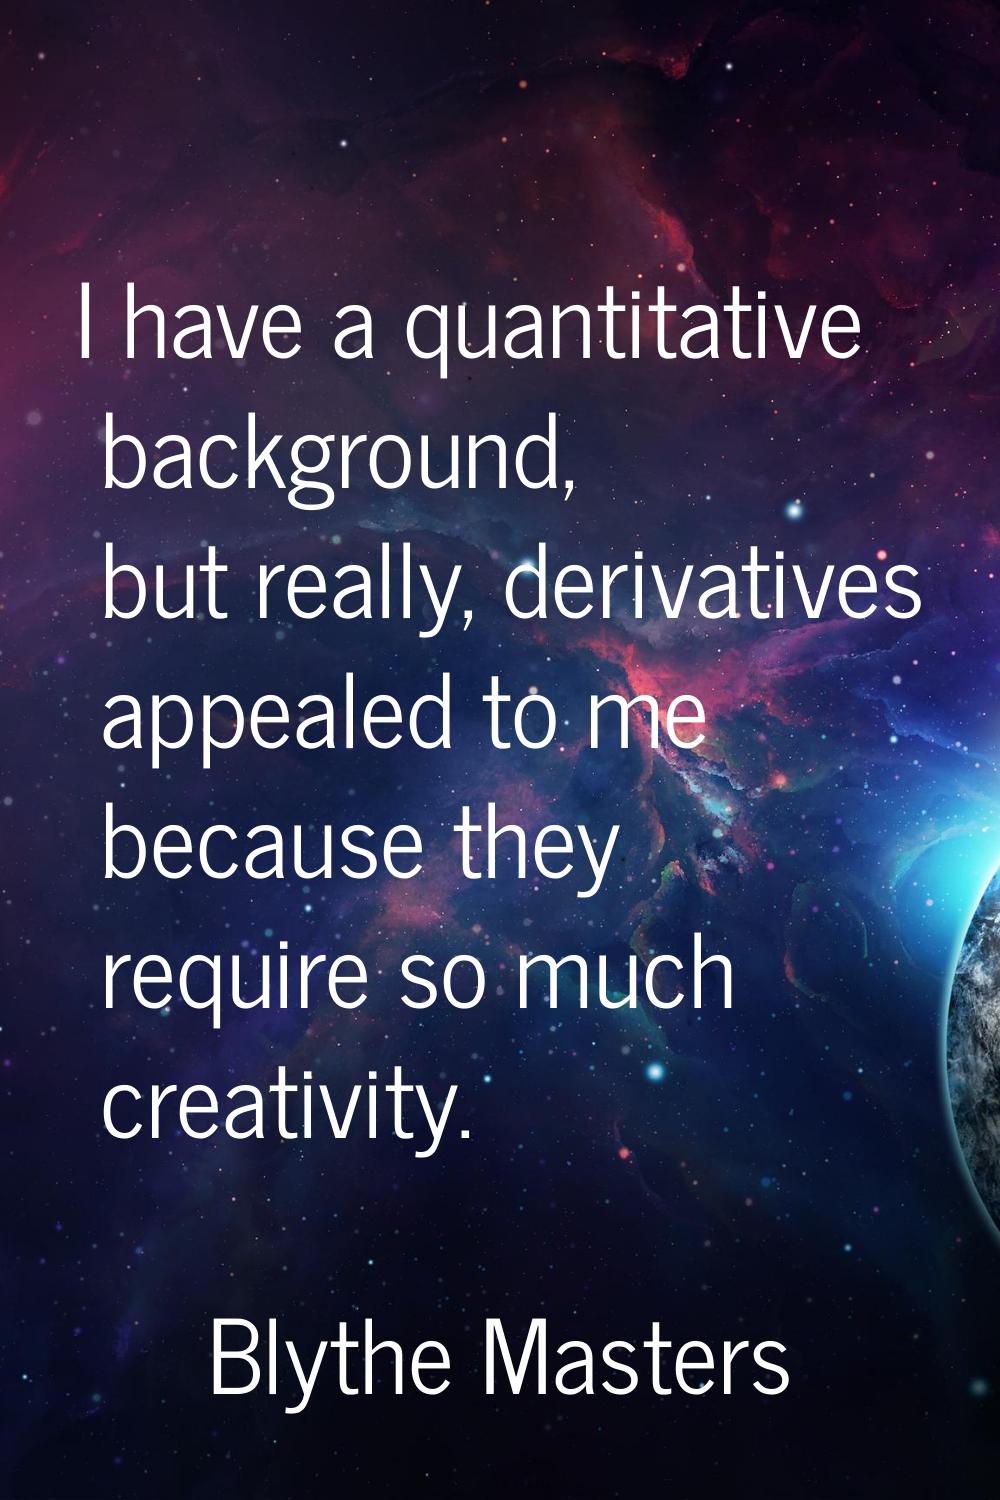 I have a quantitative background, but really, derivatives appealed to me because they require so mu